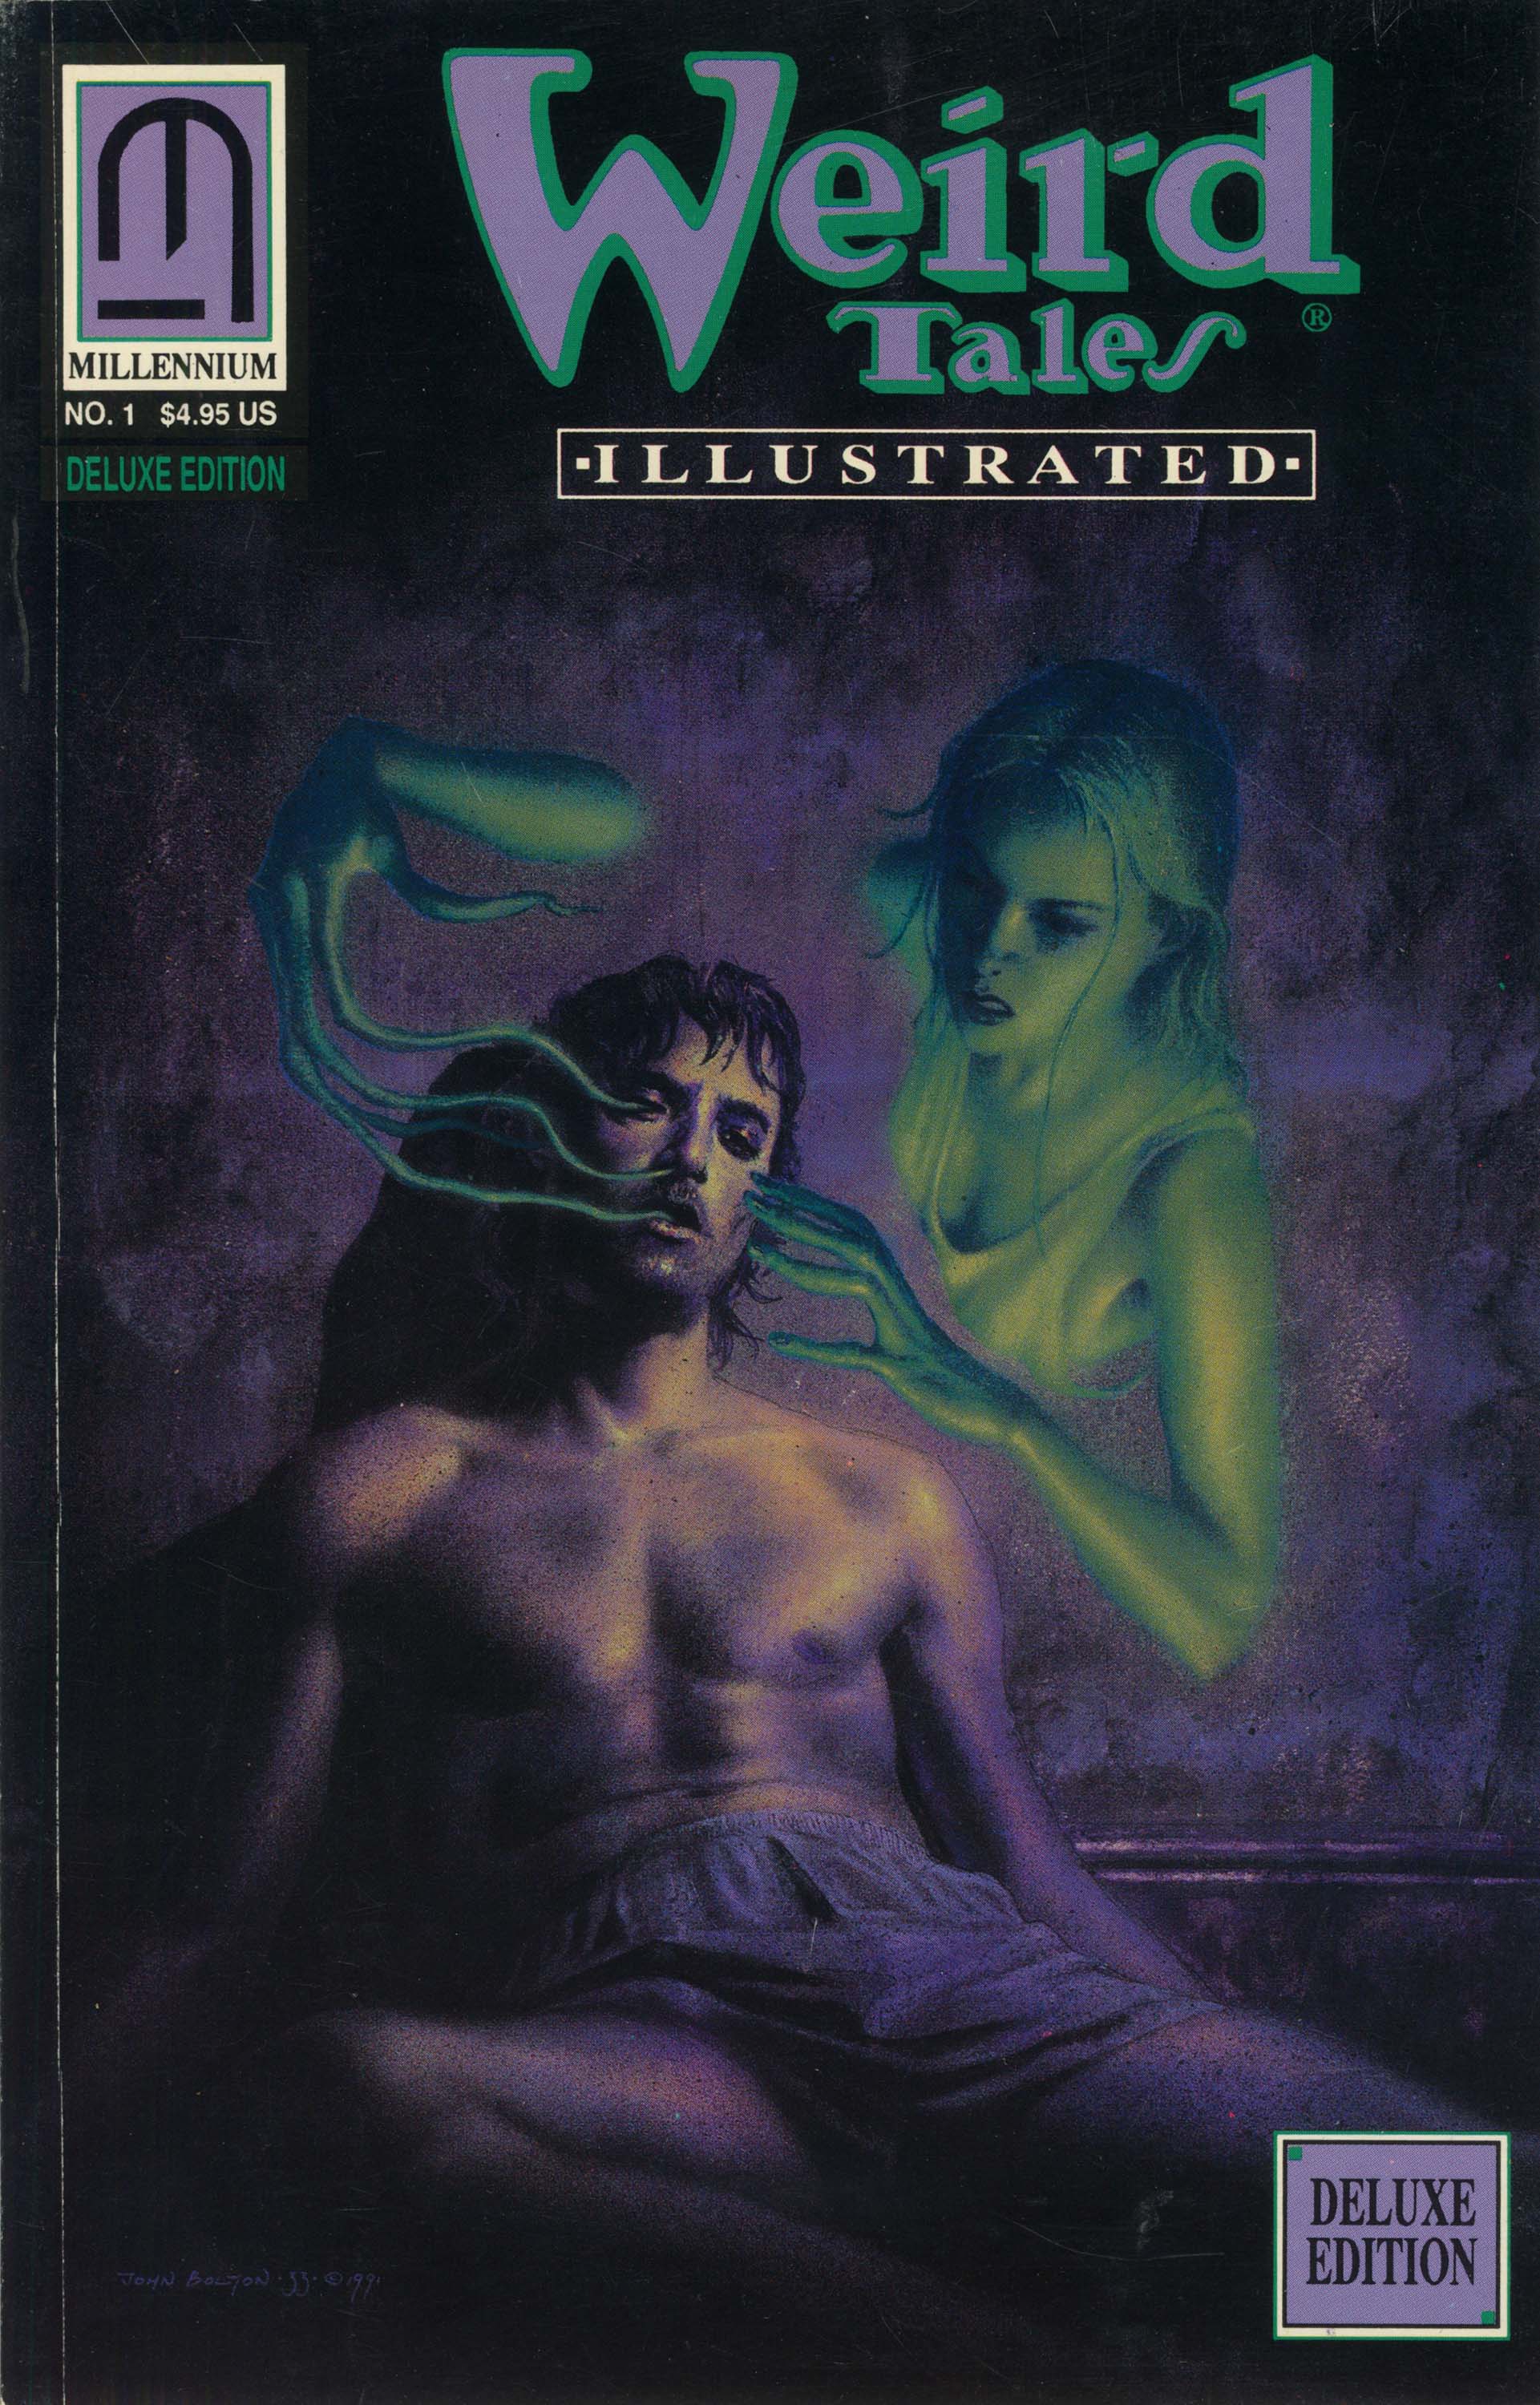 Weird Tales Illustrated #1, cover, art by John Bolton